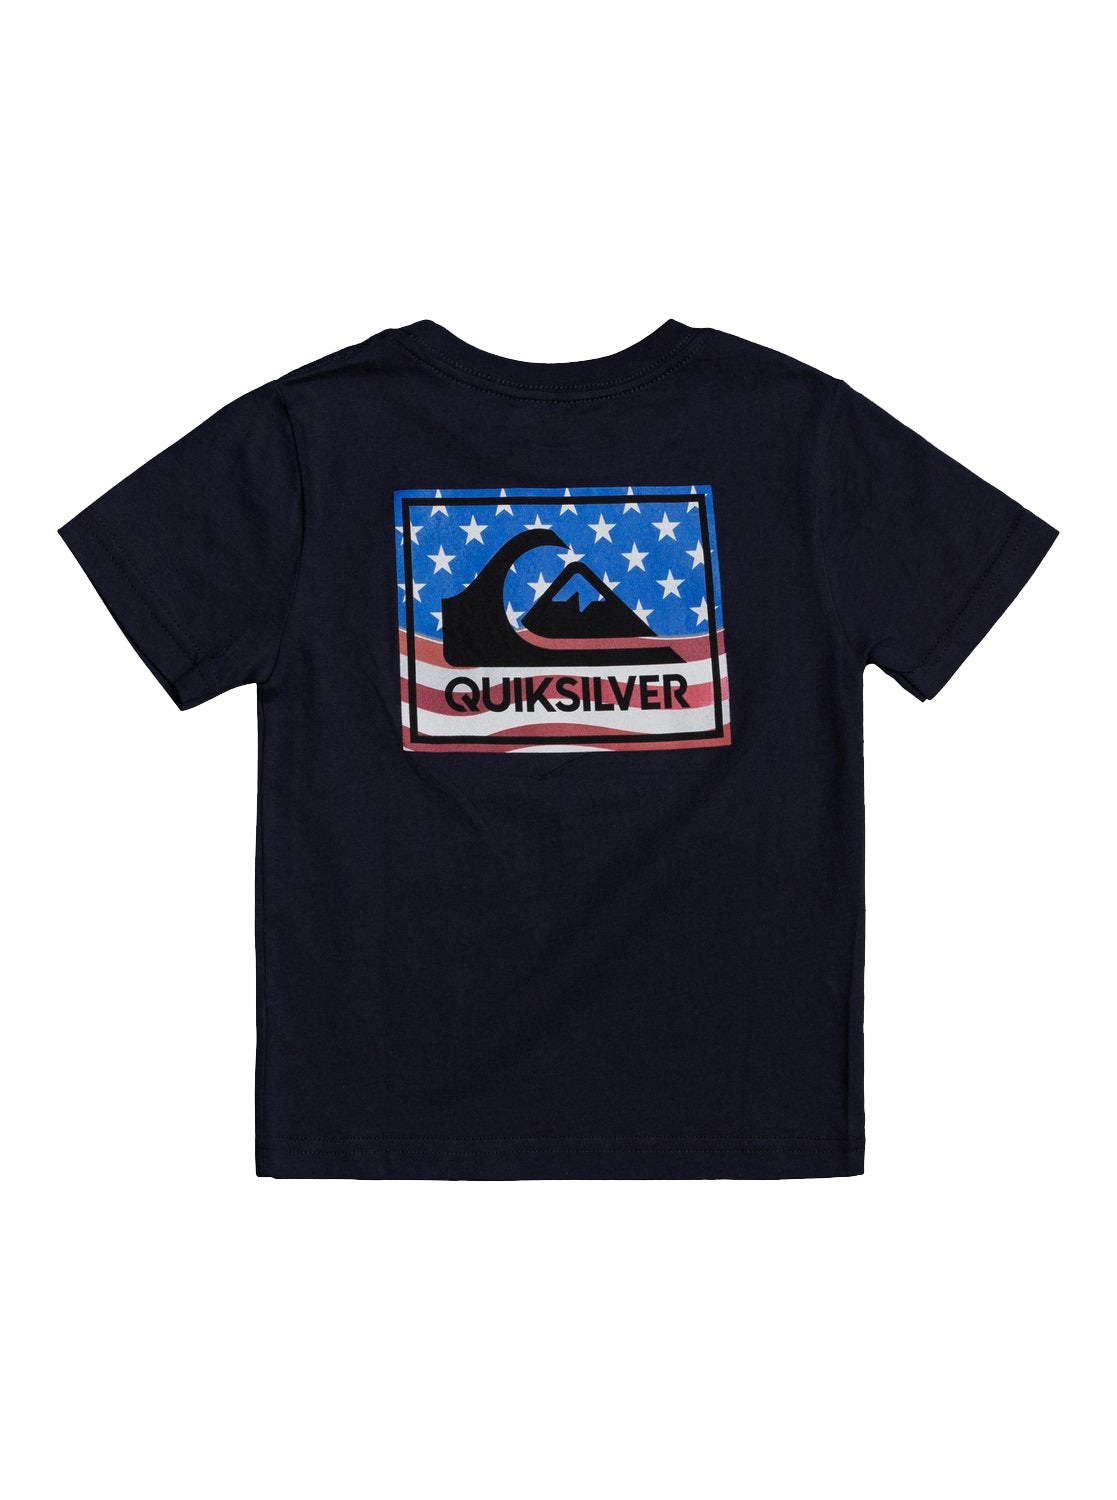 Quiksilver Architexure Youth Tee BYJ0 5